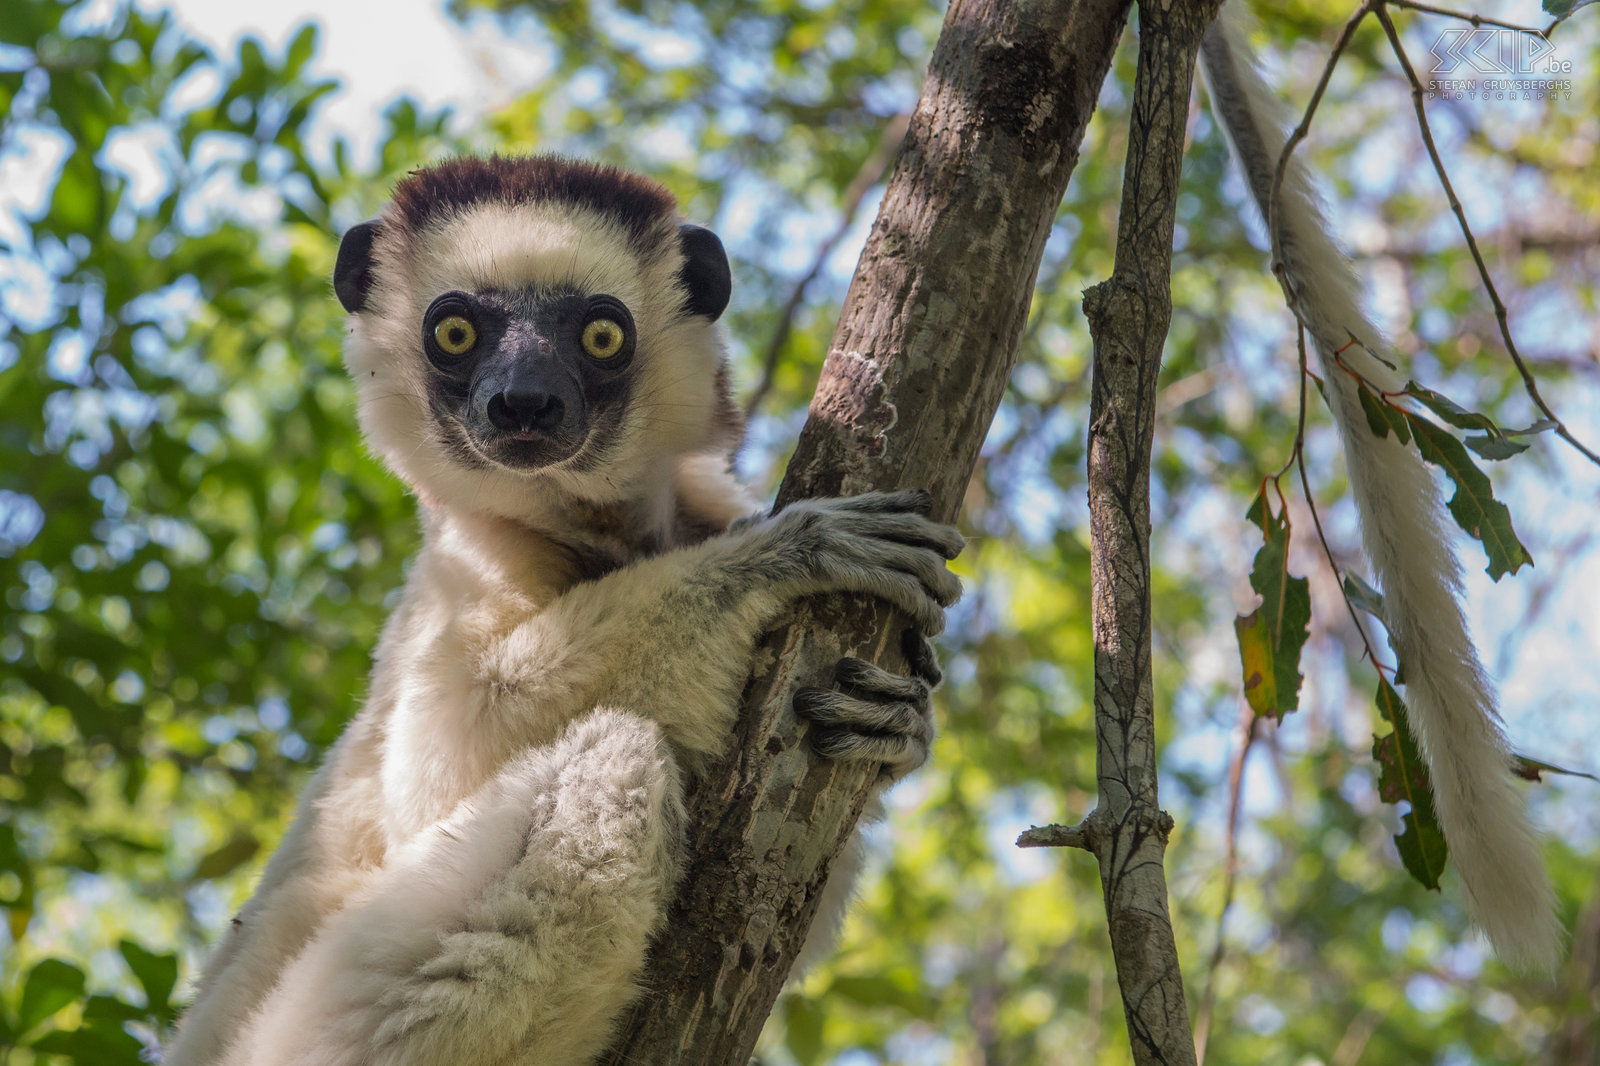 Zombitse - Verreaux's sifaka The Verreaux's sifaka (Propithecus verreauxi) is a medium-sized lemur that is quite common and that can found in rainforests, dry deciduous forests and even spiny forests. Stefan Cruysberghs